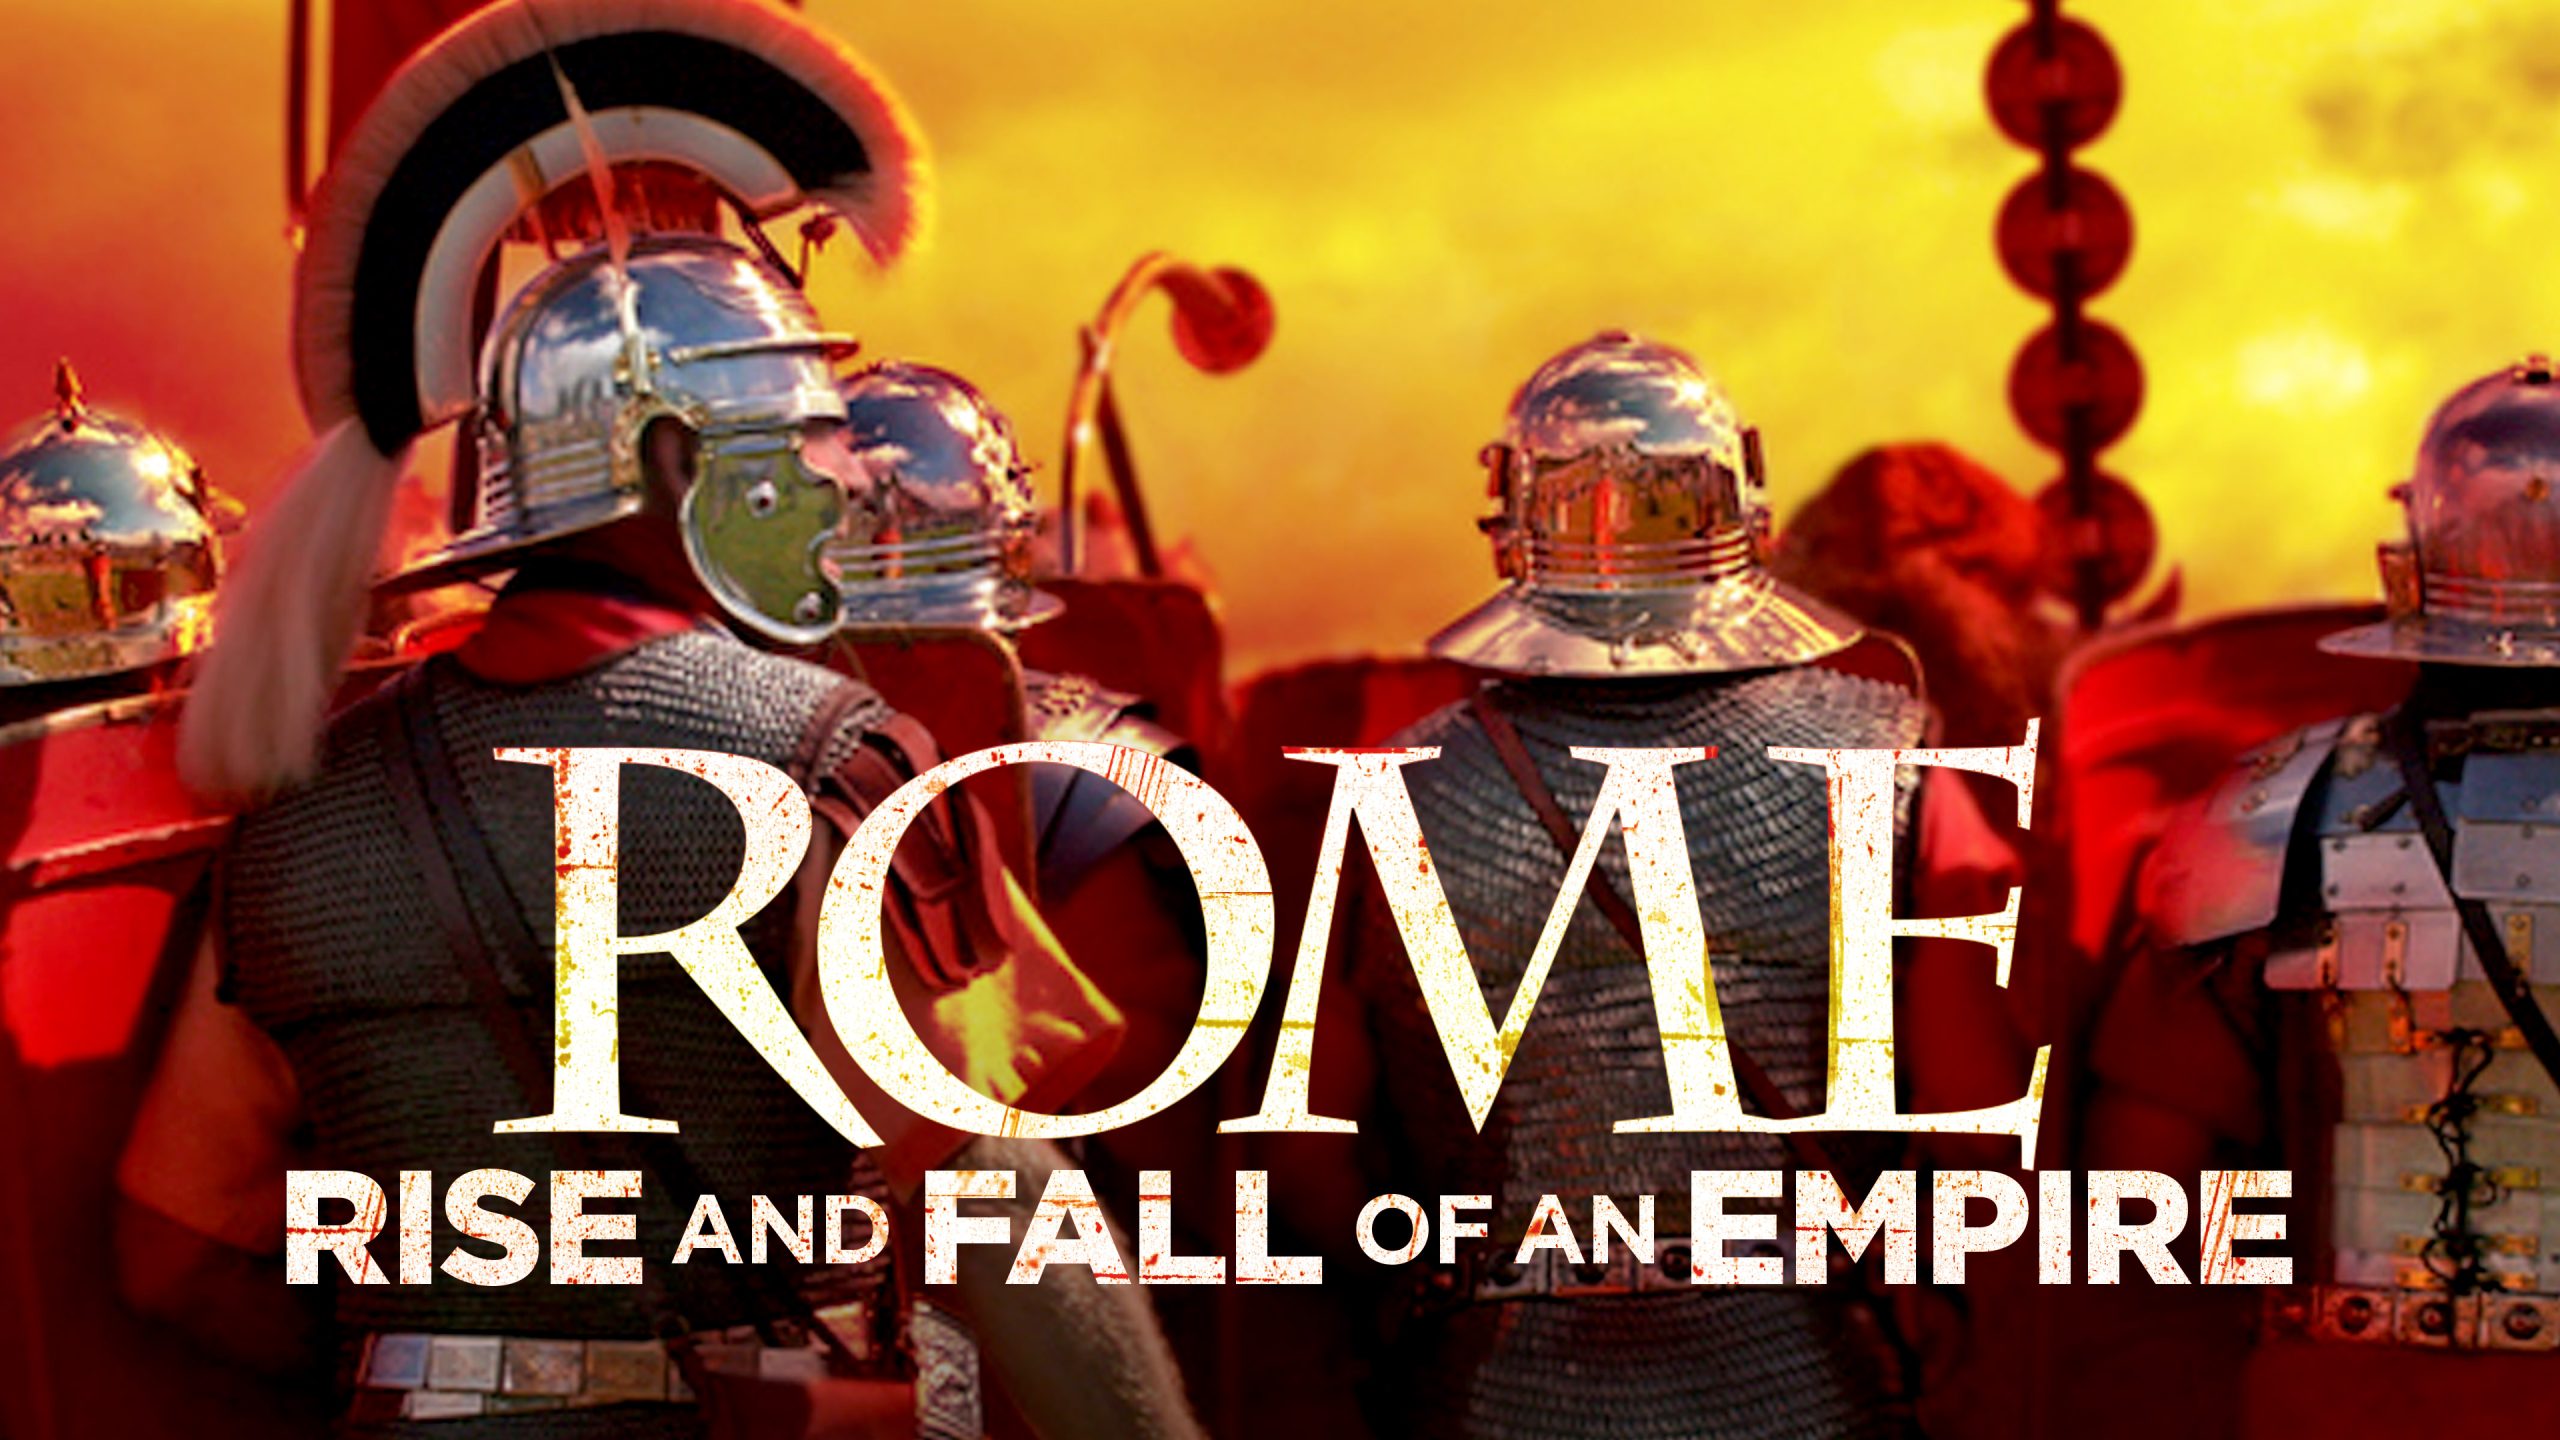 You are currently viewing Ancient Rome: The Rise and Fall of an Empire episode 4